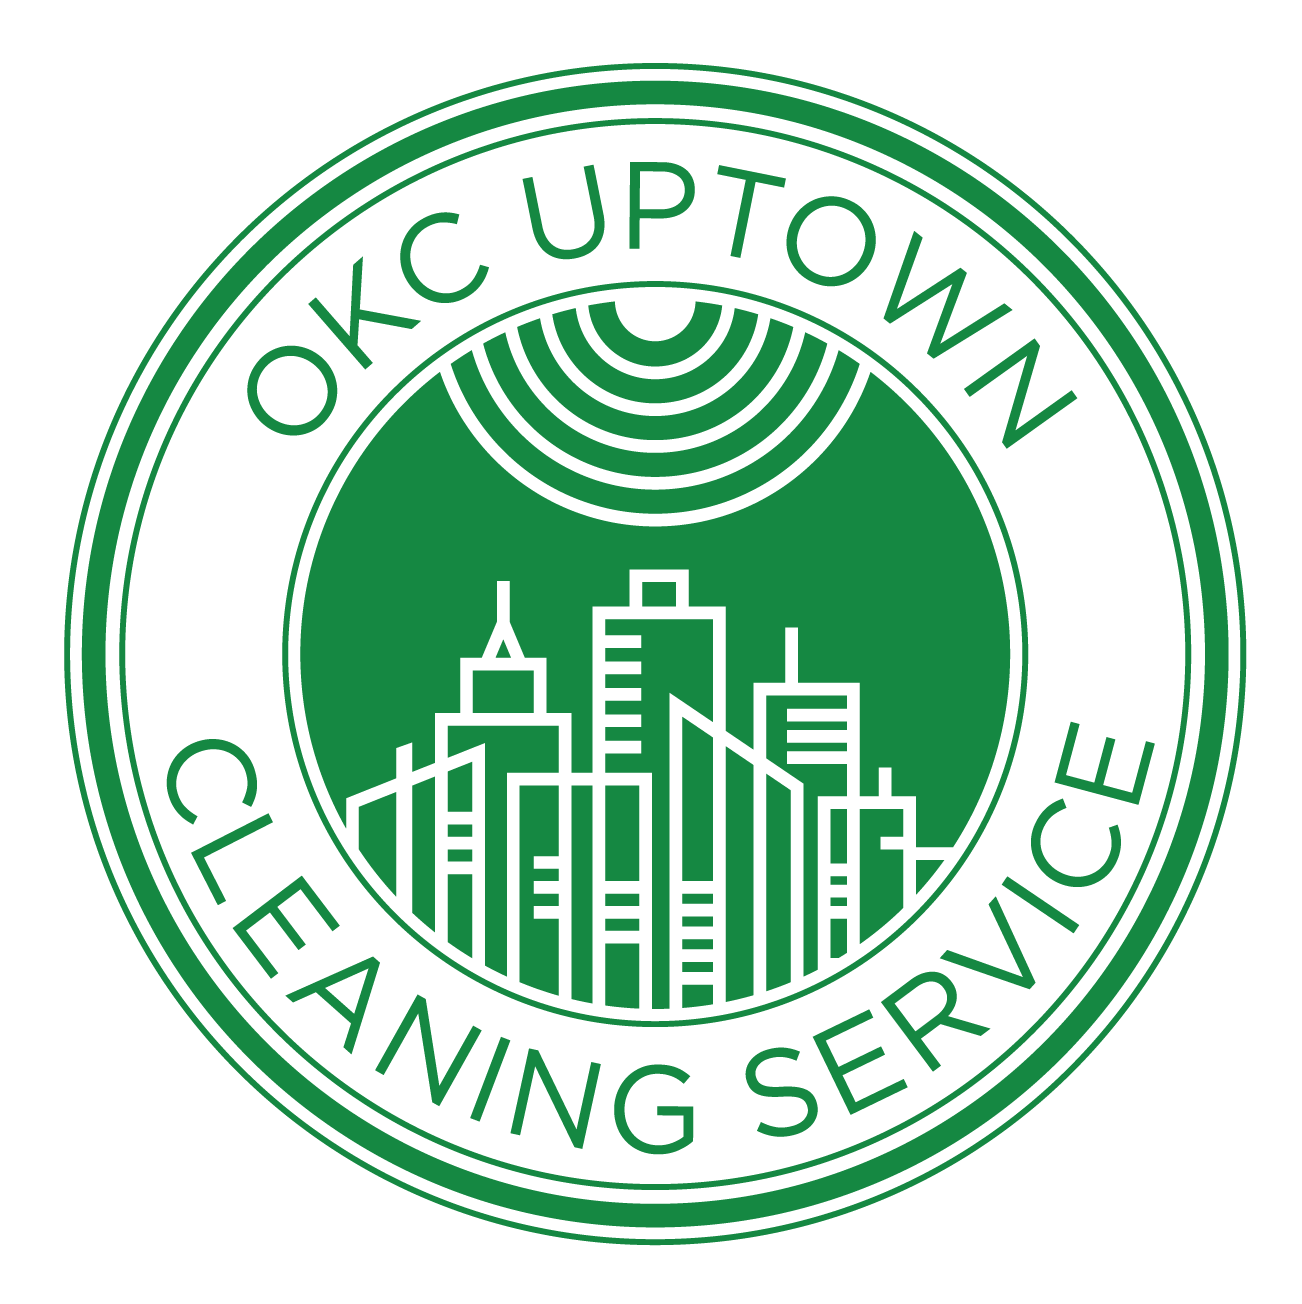 okcuptowncleaning